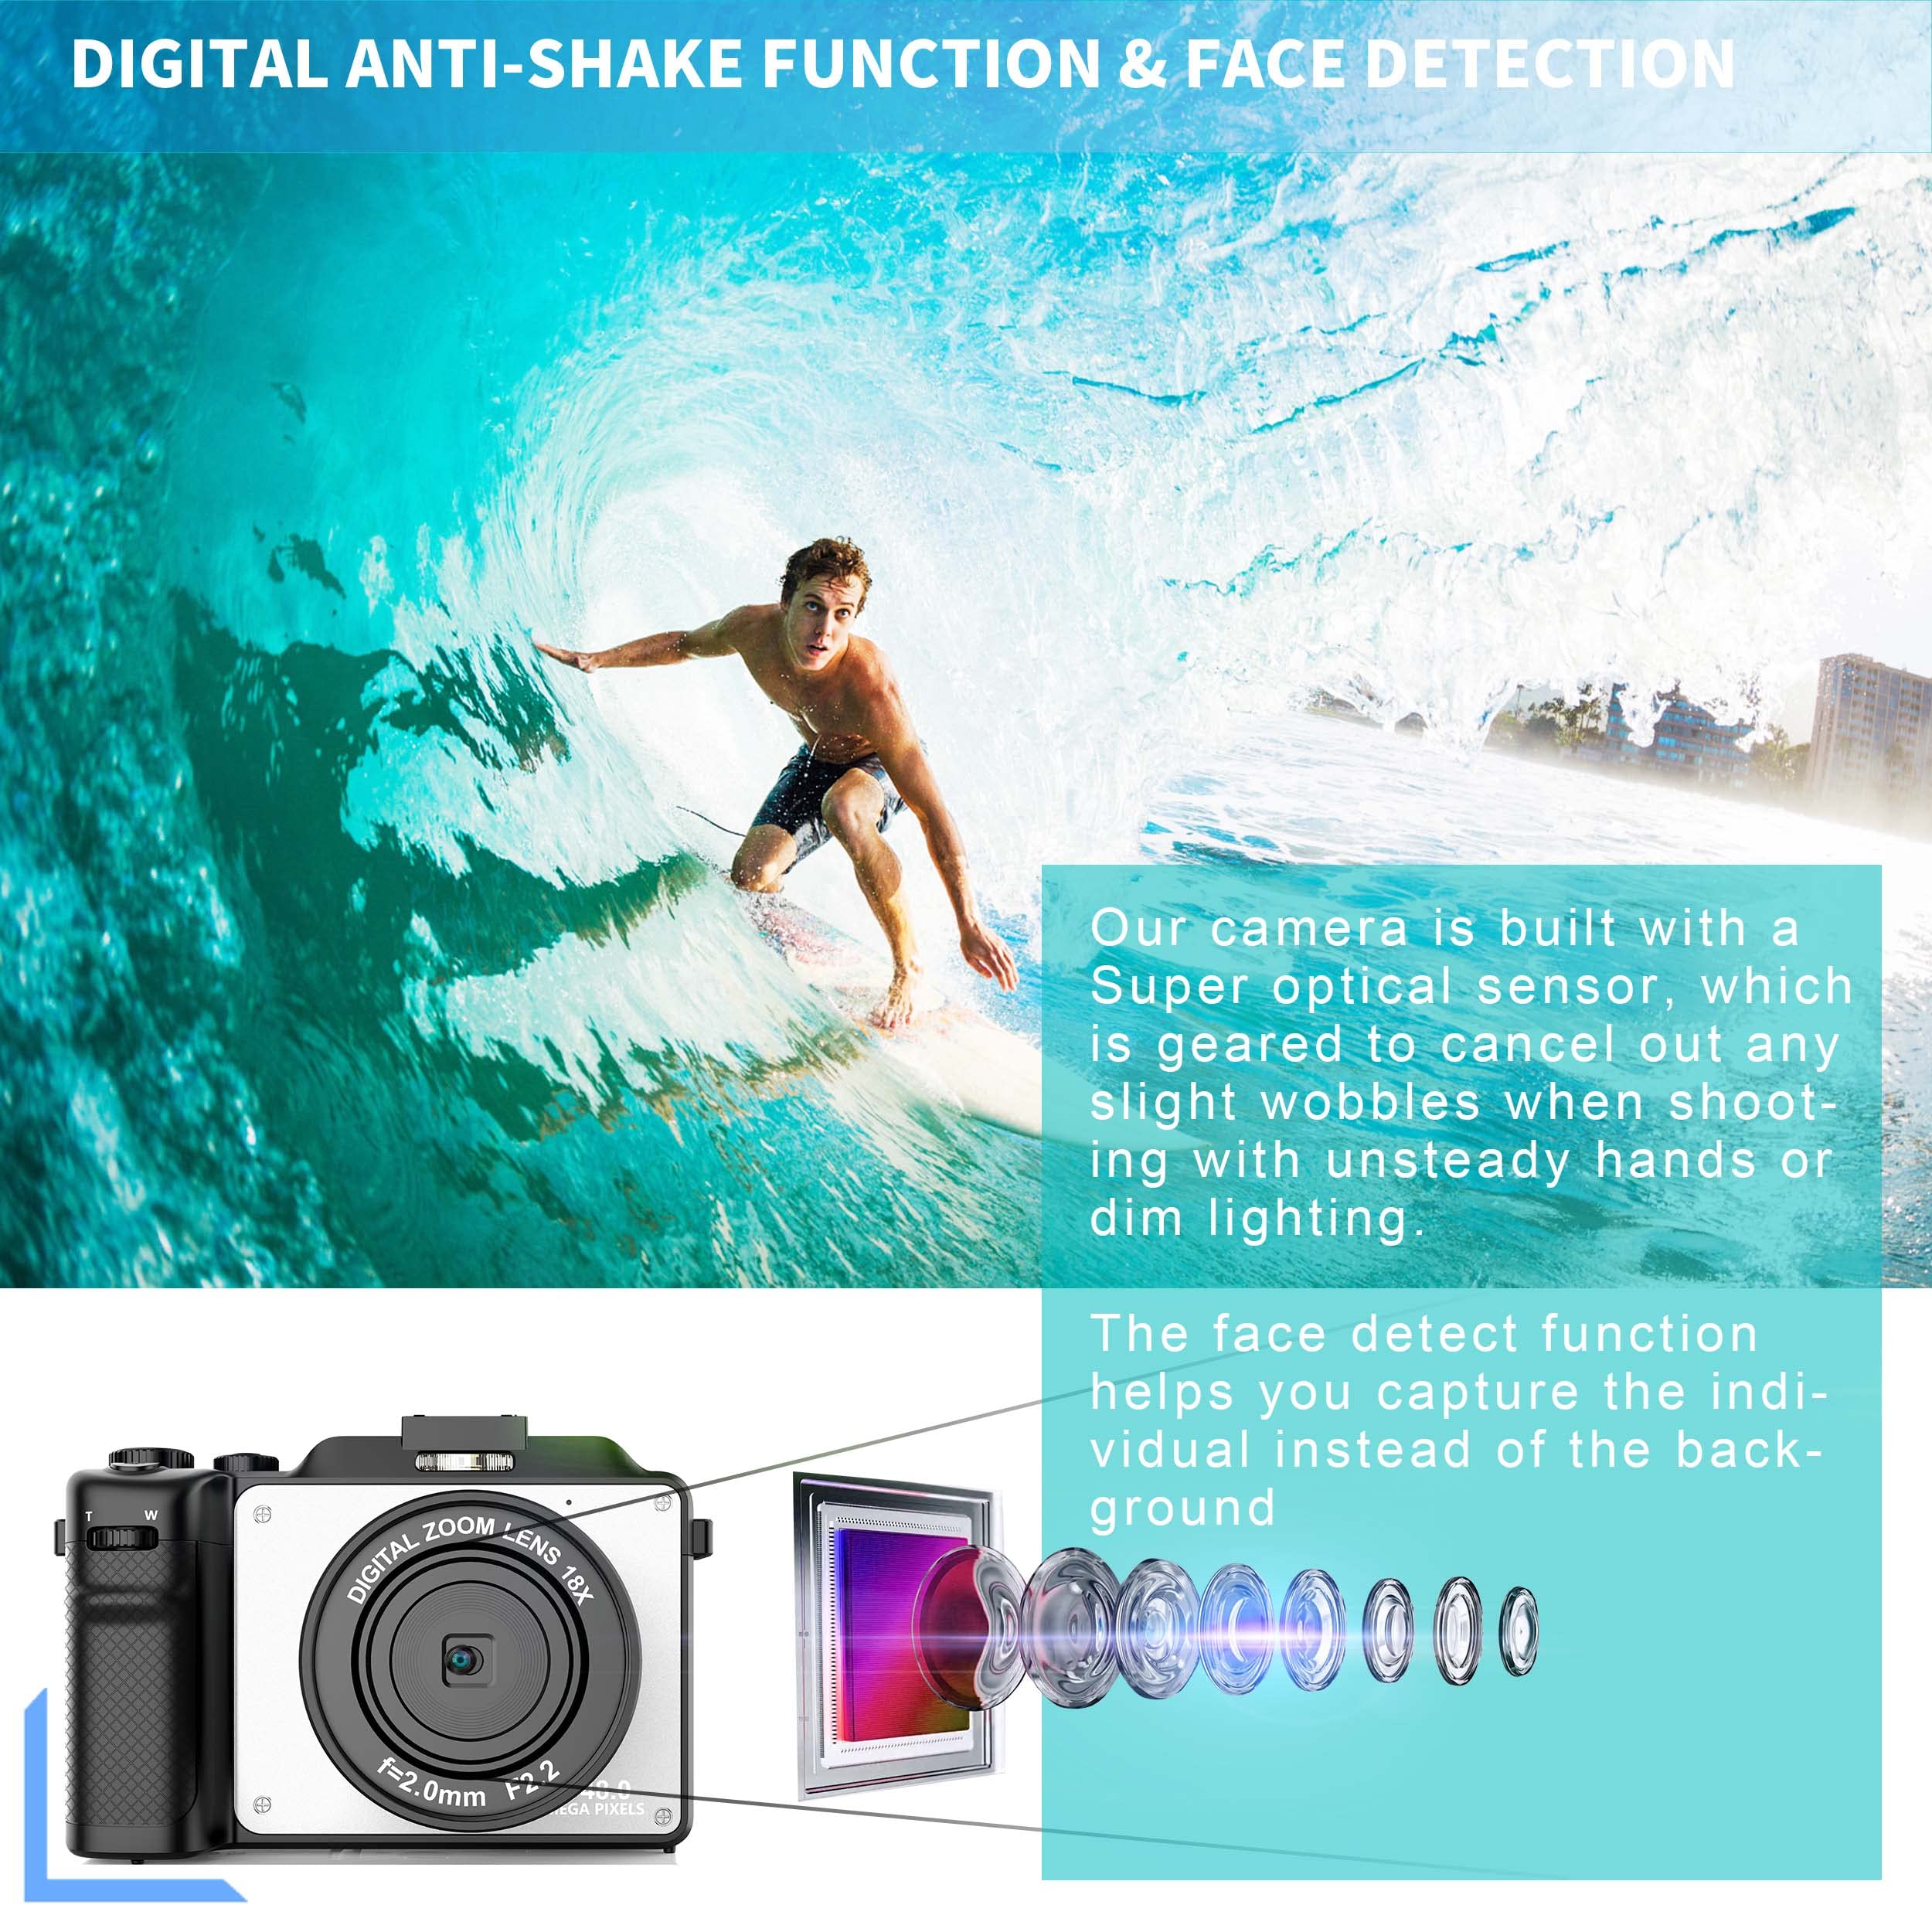 Vlogging Camera, 4K 48MP Digital Camera with WiFi, Free 32G TF Card & Hand Strap, Auto Focus & Anti-Shake, Built-in 7 Color Filters, Face Detect, 3'' IPS Screen, 140°Wide Angle, 18X Digital Zoom AC-09